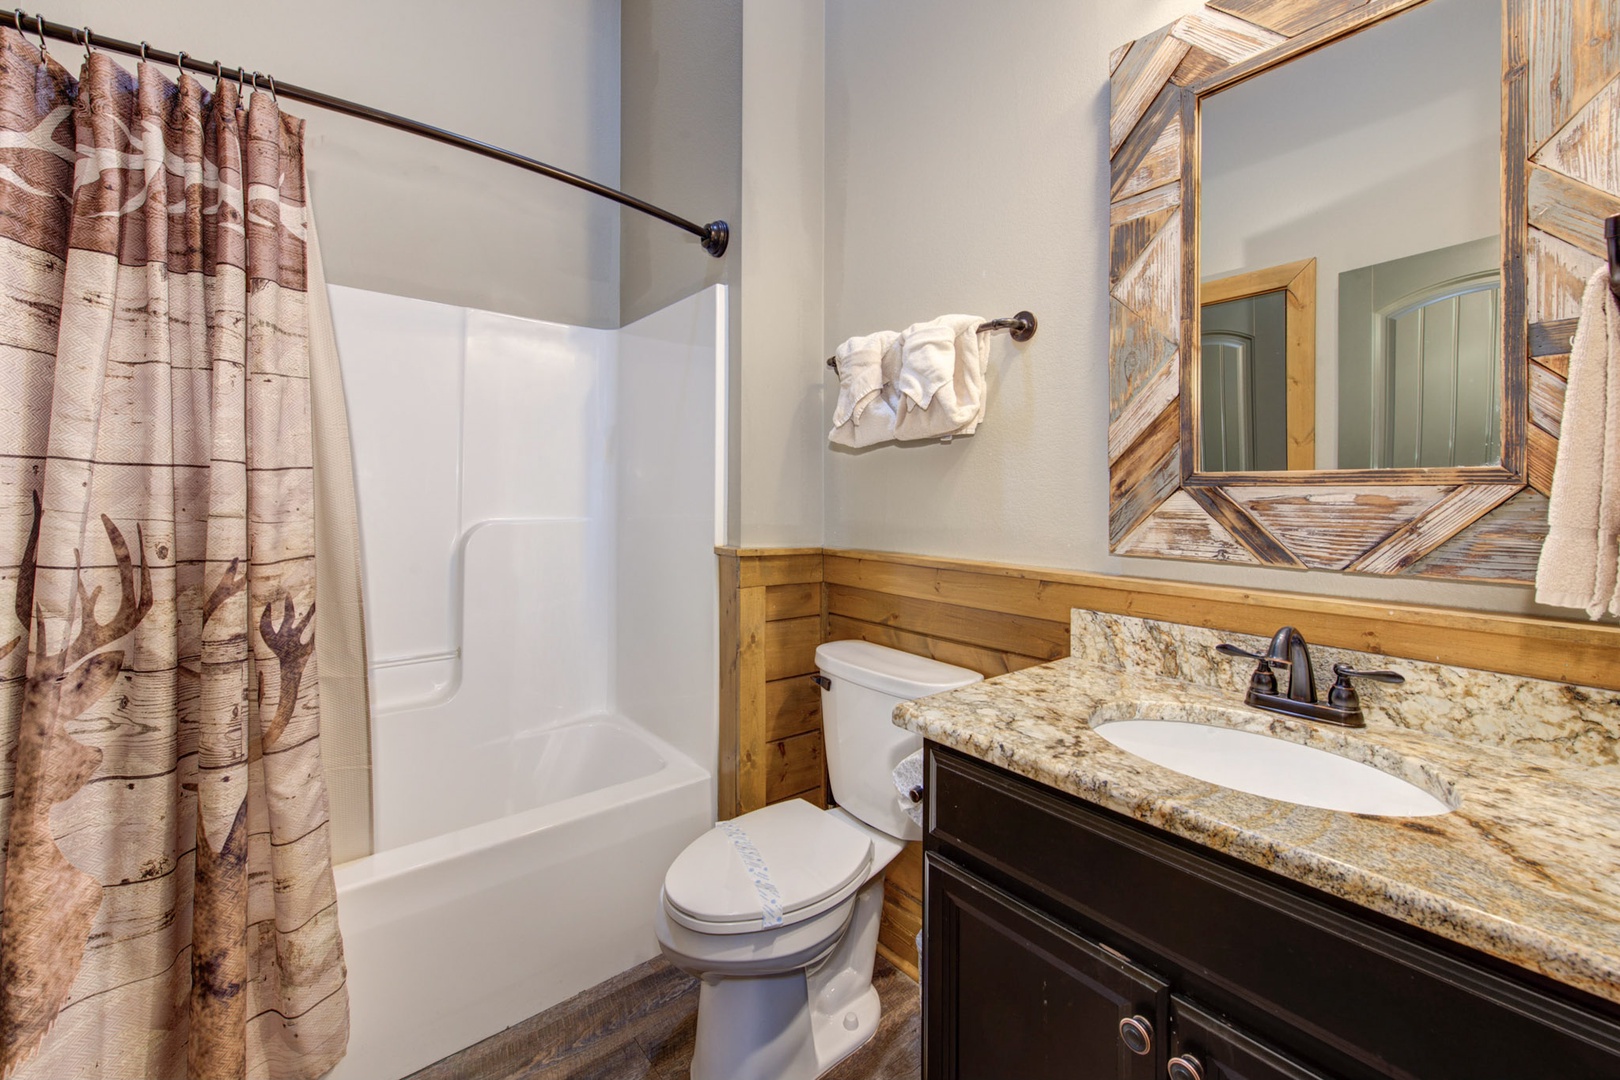 The third 1st floor ensuite features a single vanity & shower/tub combo